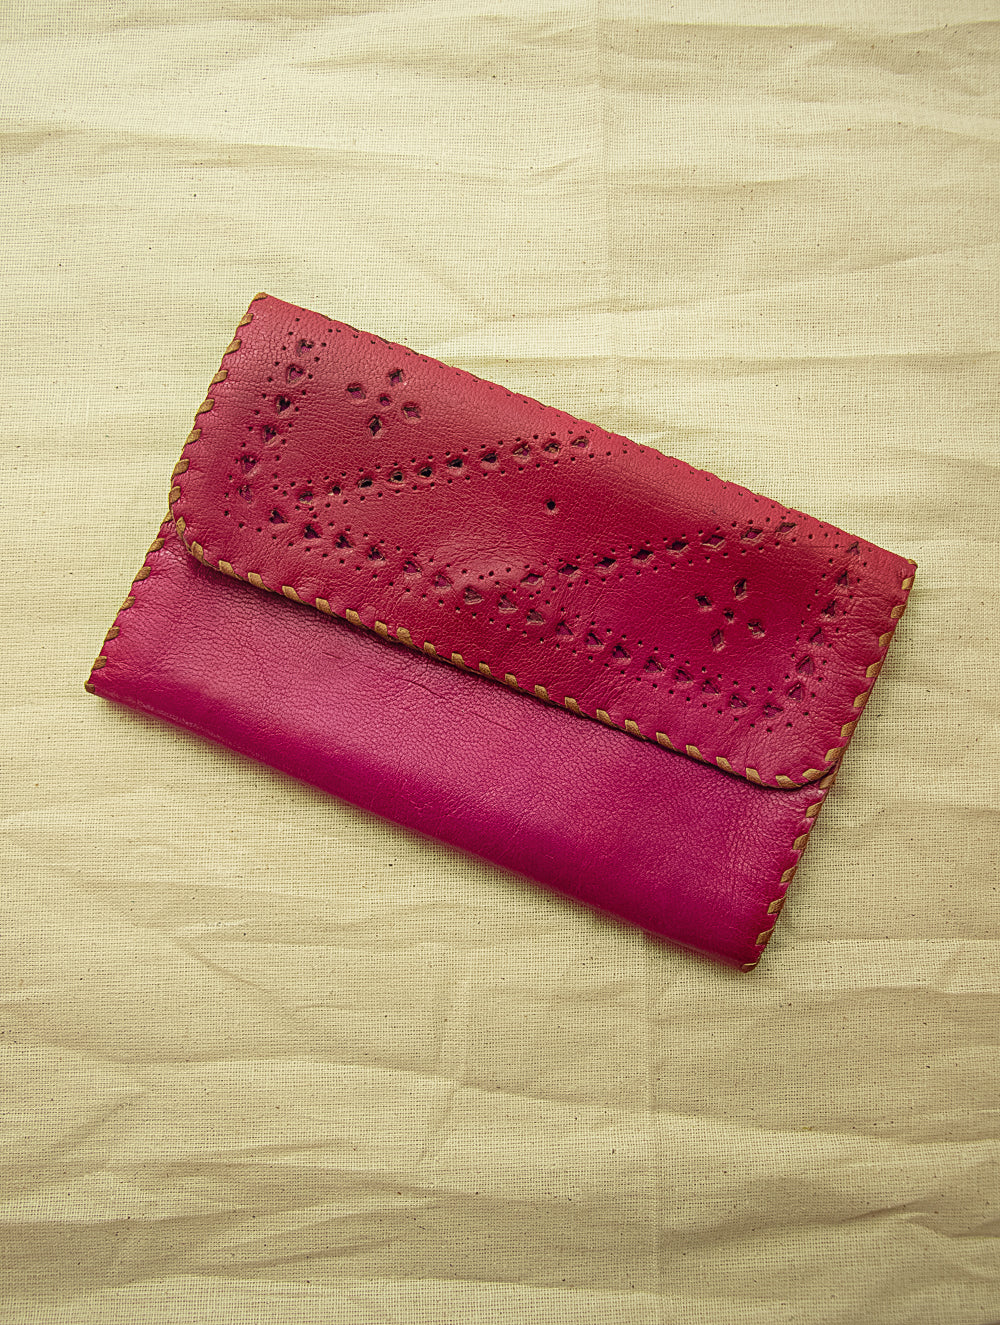 Load image into Gallery viewer, Handcrafted Leather Clutch / Fold-Out Wallet with Hand Stitch Detail - The India Craft House 